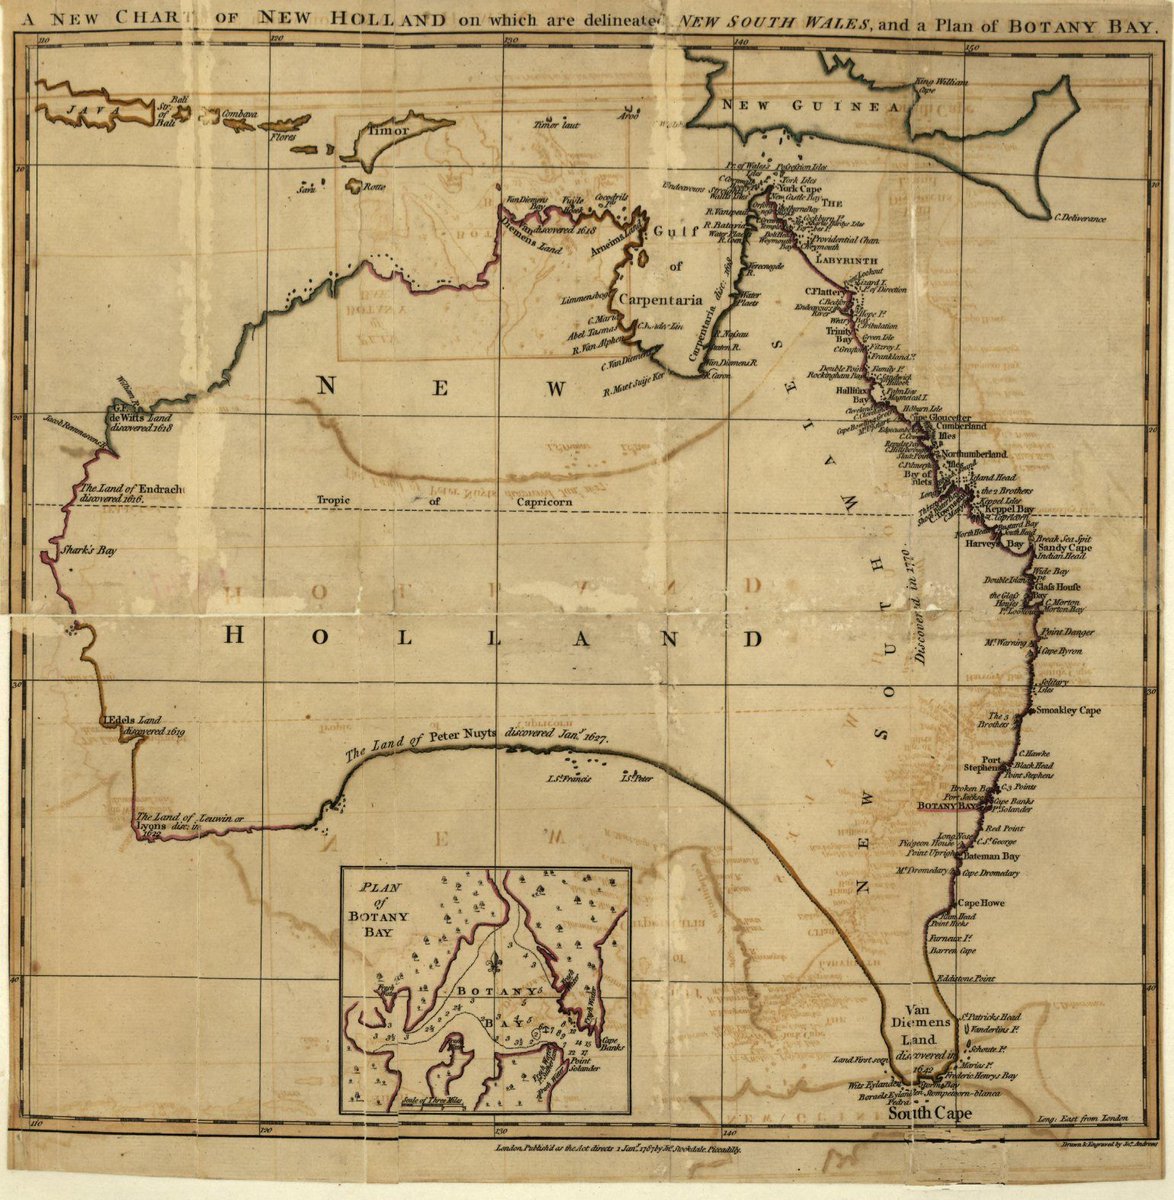 14/ James Cooks' late-1700s maps of Northeast America and Australia were so good, they were used well into the 20th century:Australia                   Northeast USA